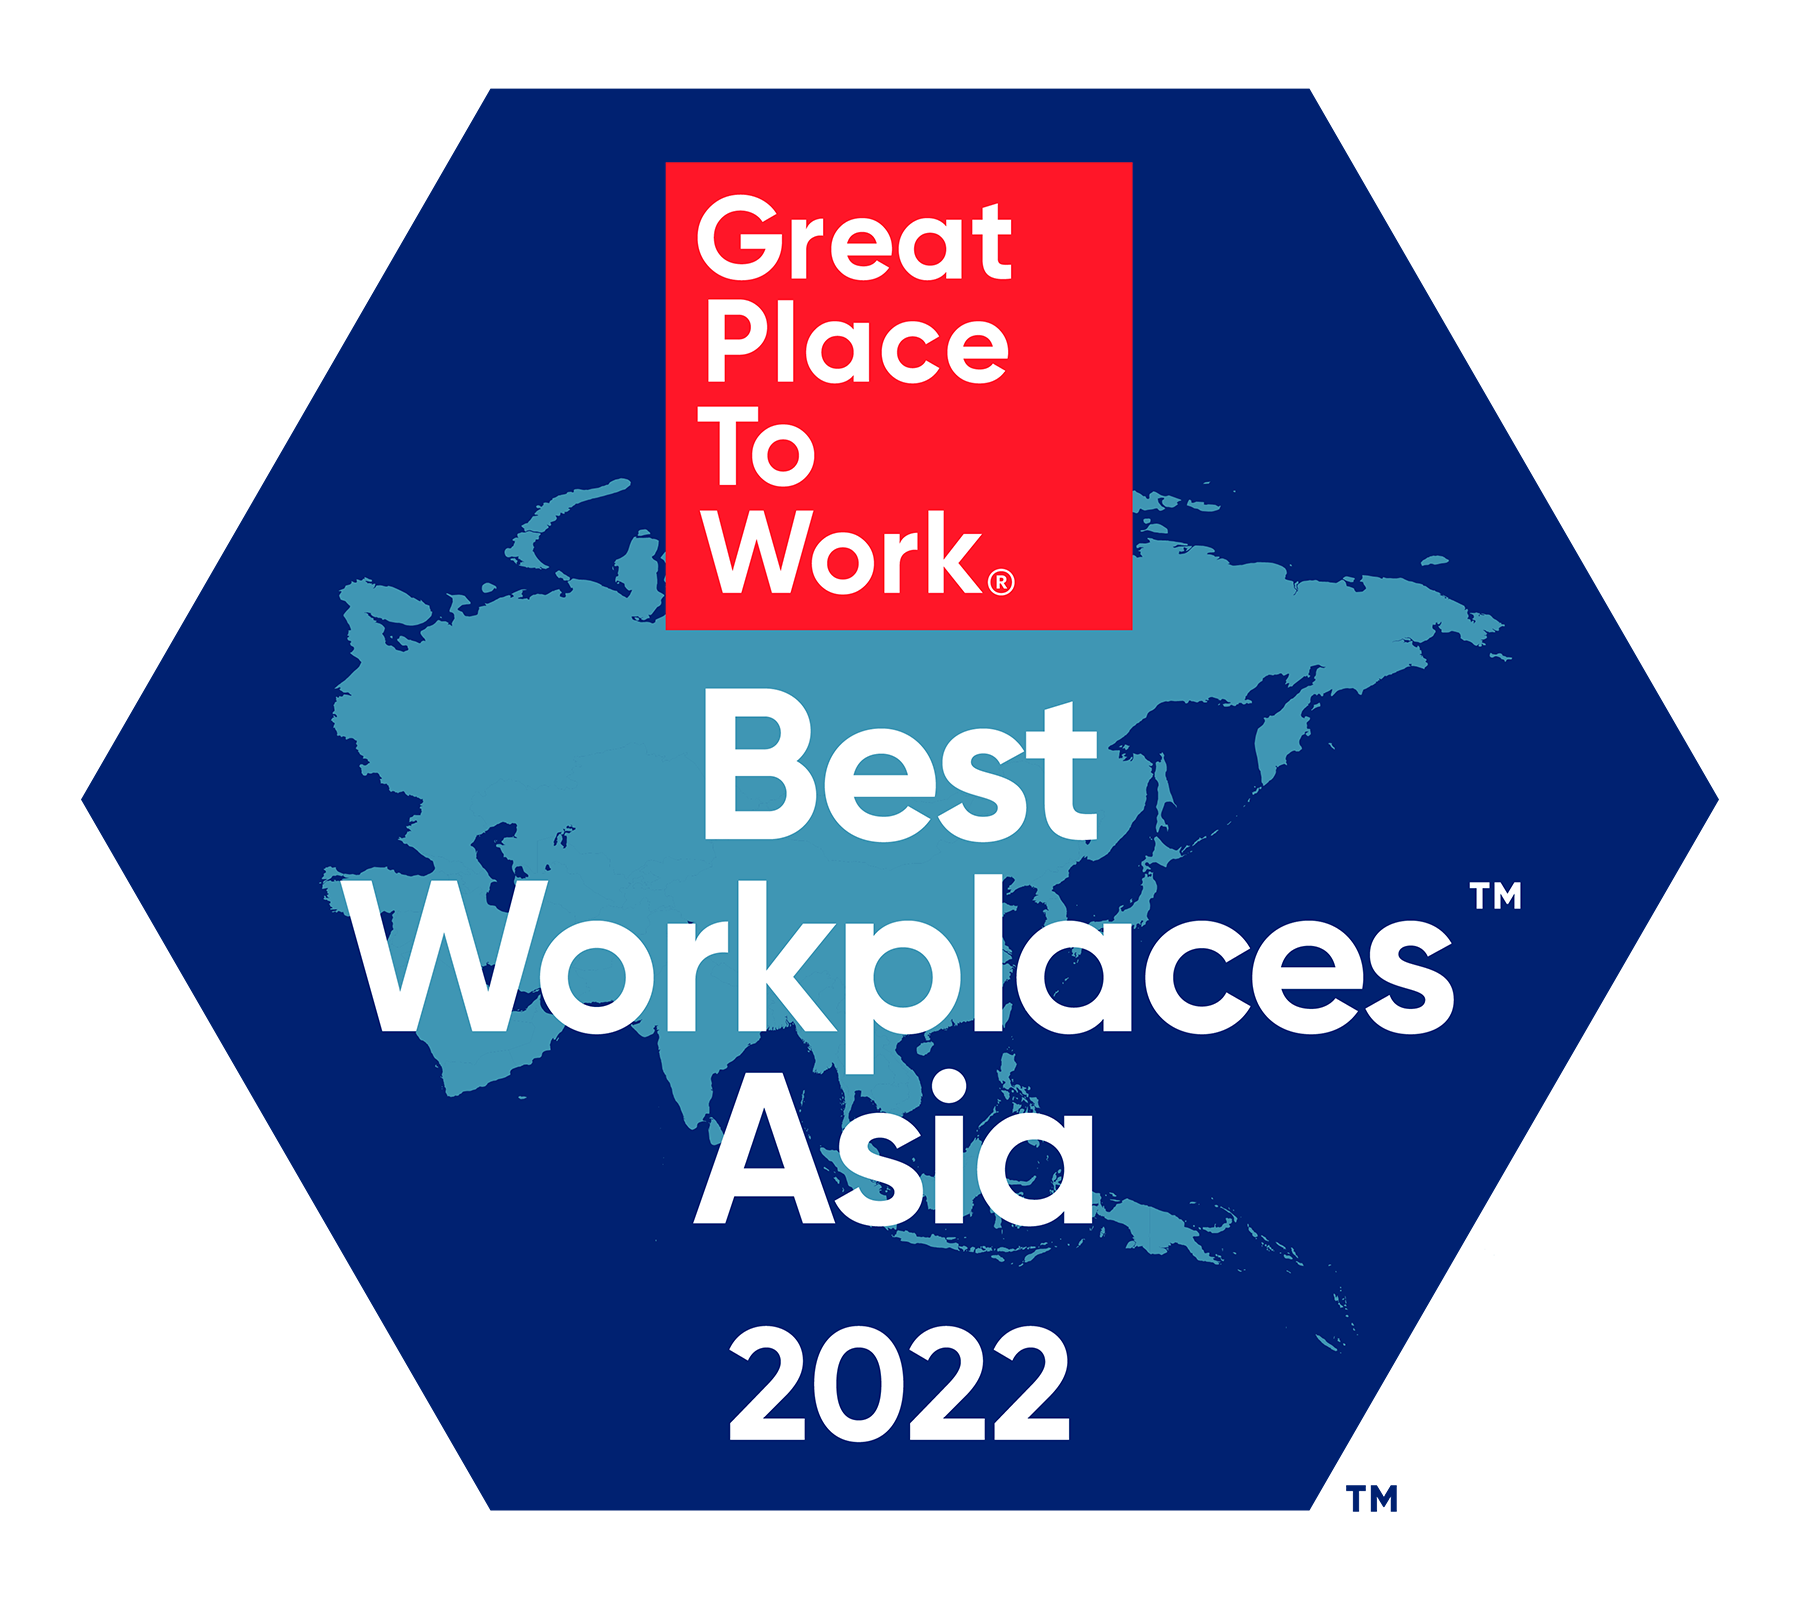 Best Workplaces Asia